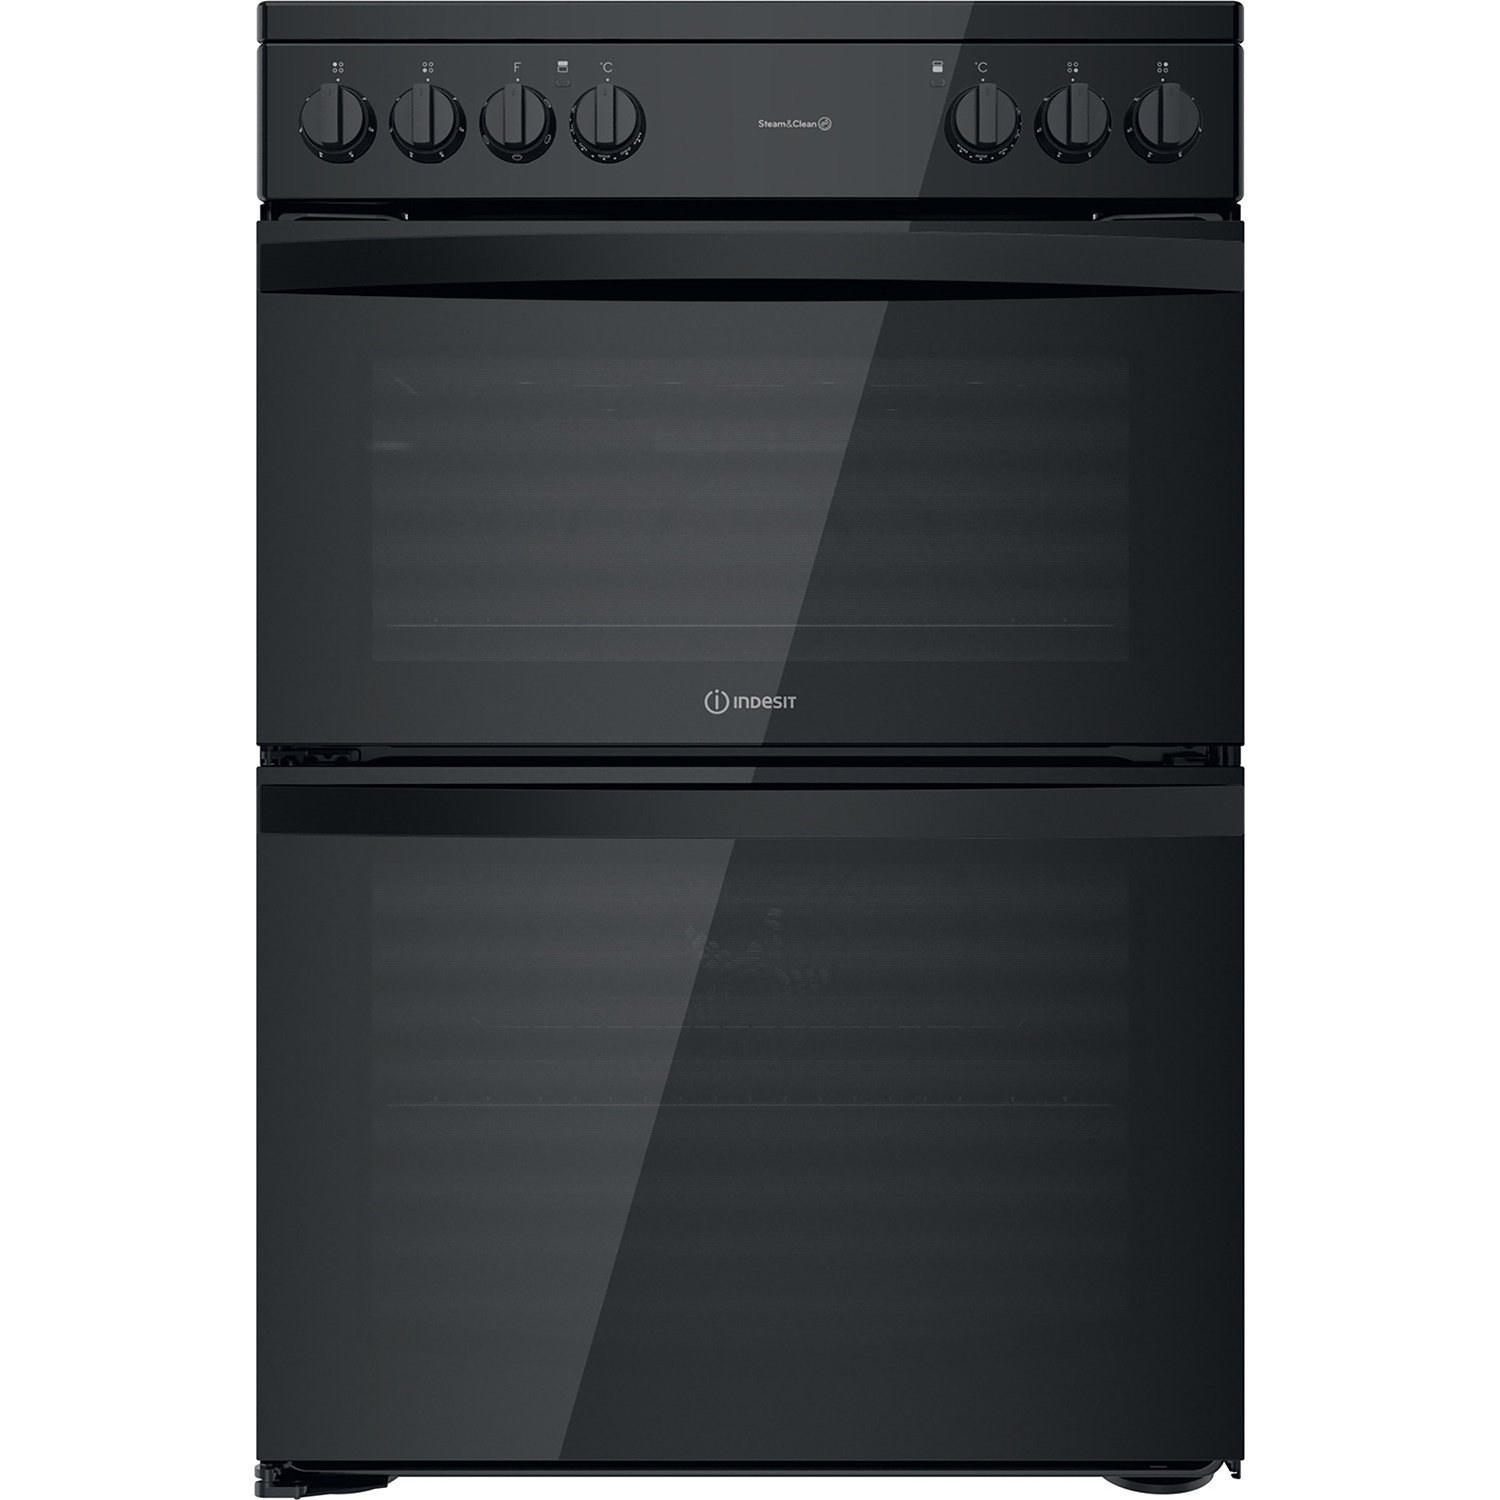 Indesit ID67V9KMB/UK 60cm Double Oven Electric Cooker Black